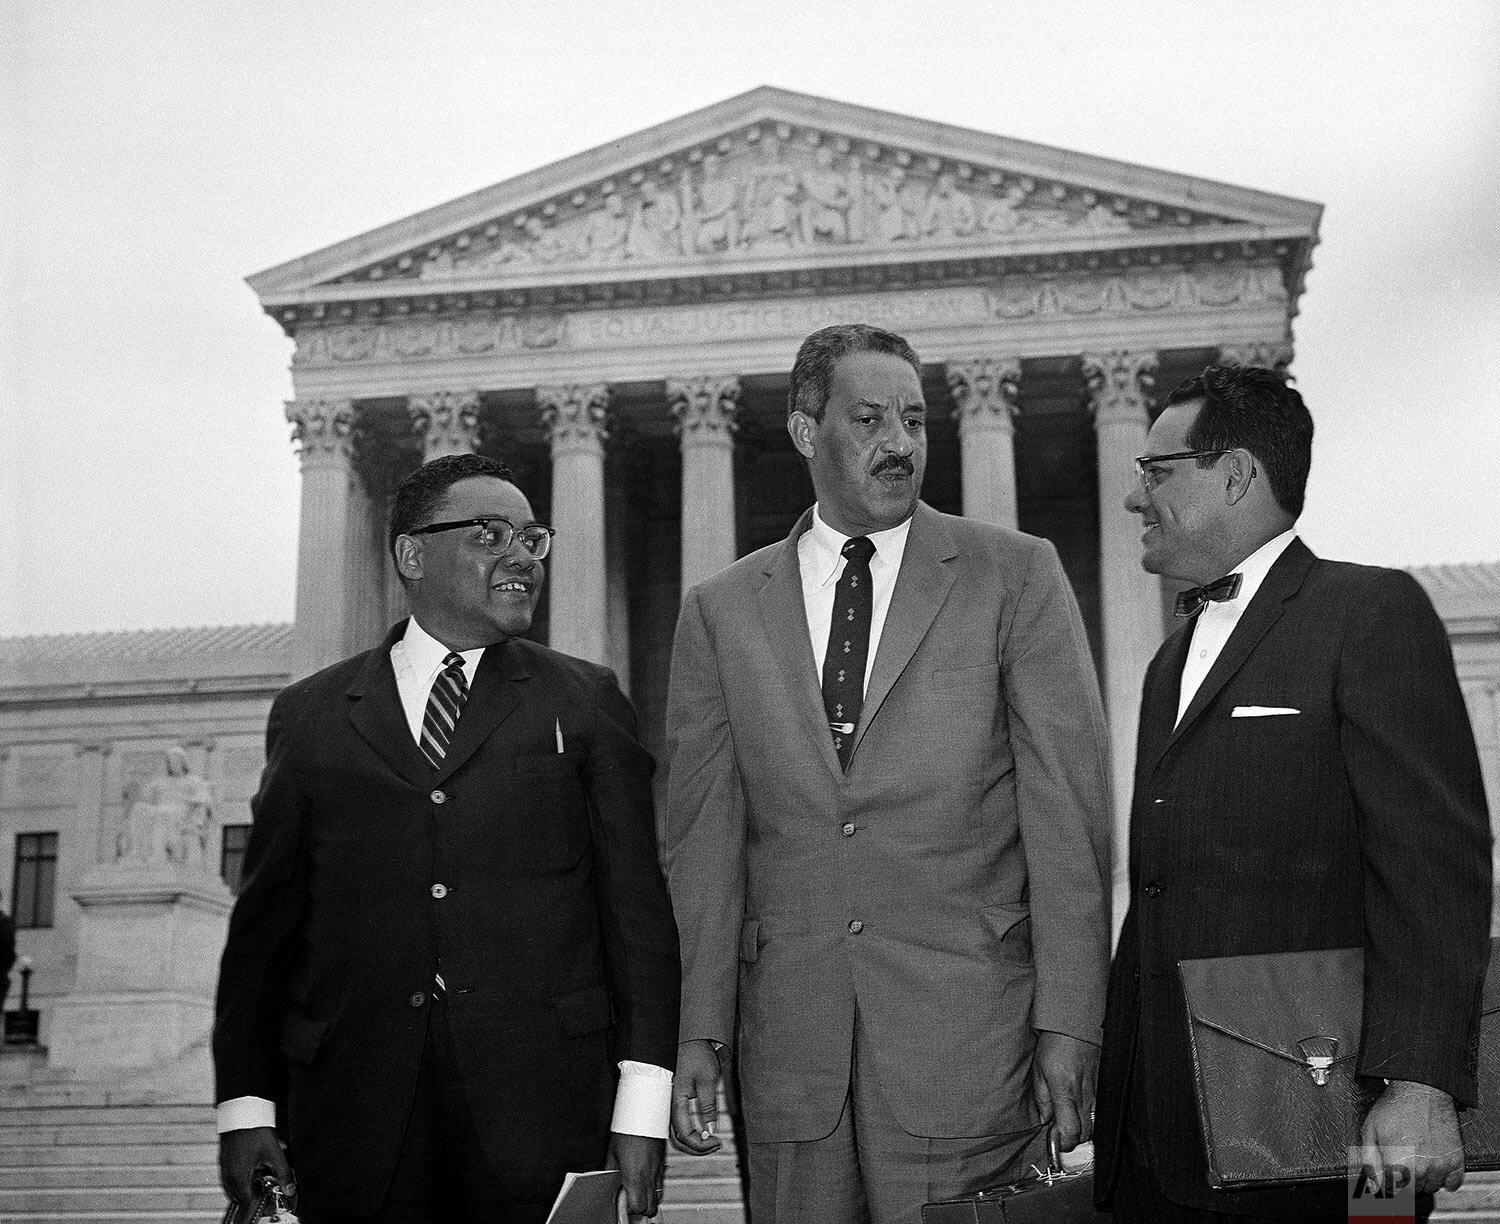  Three attorneys for the National Association for the Advancement of Colored People pose outside the Supreme Court in Washington, D.C., after arriving, Aug. 28, 1958, for the extraordinary session of High Tribunal on integration. From left: William T